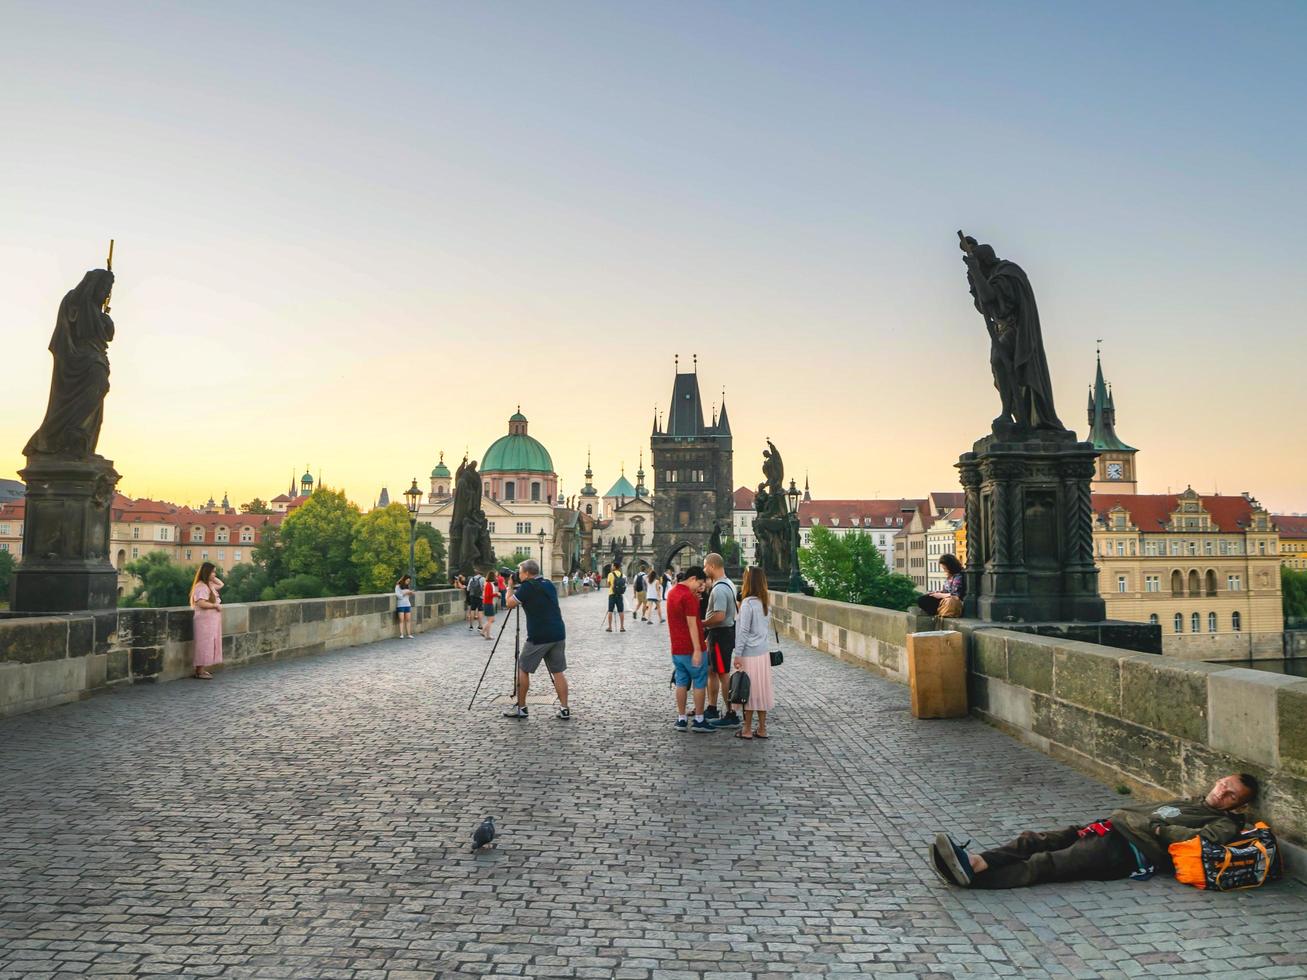 Prague, 2018- Sleeping homeless with tourists around on Charles bridge in Prague early in the morning photo